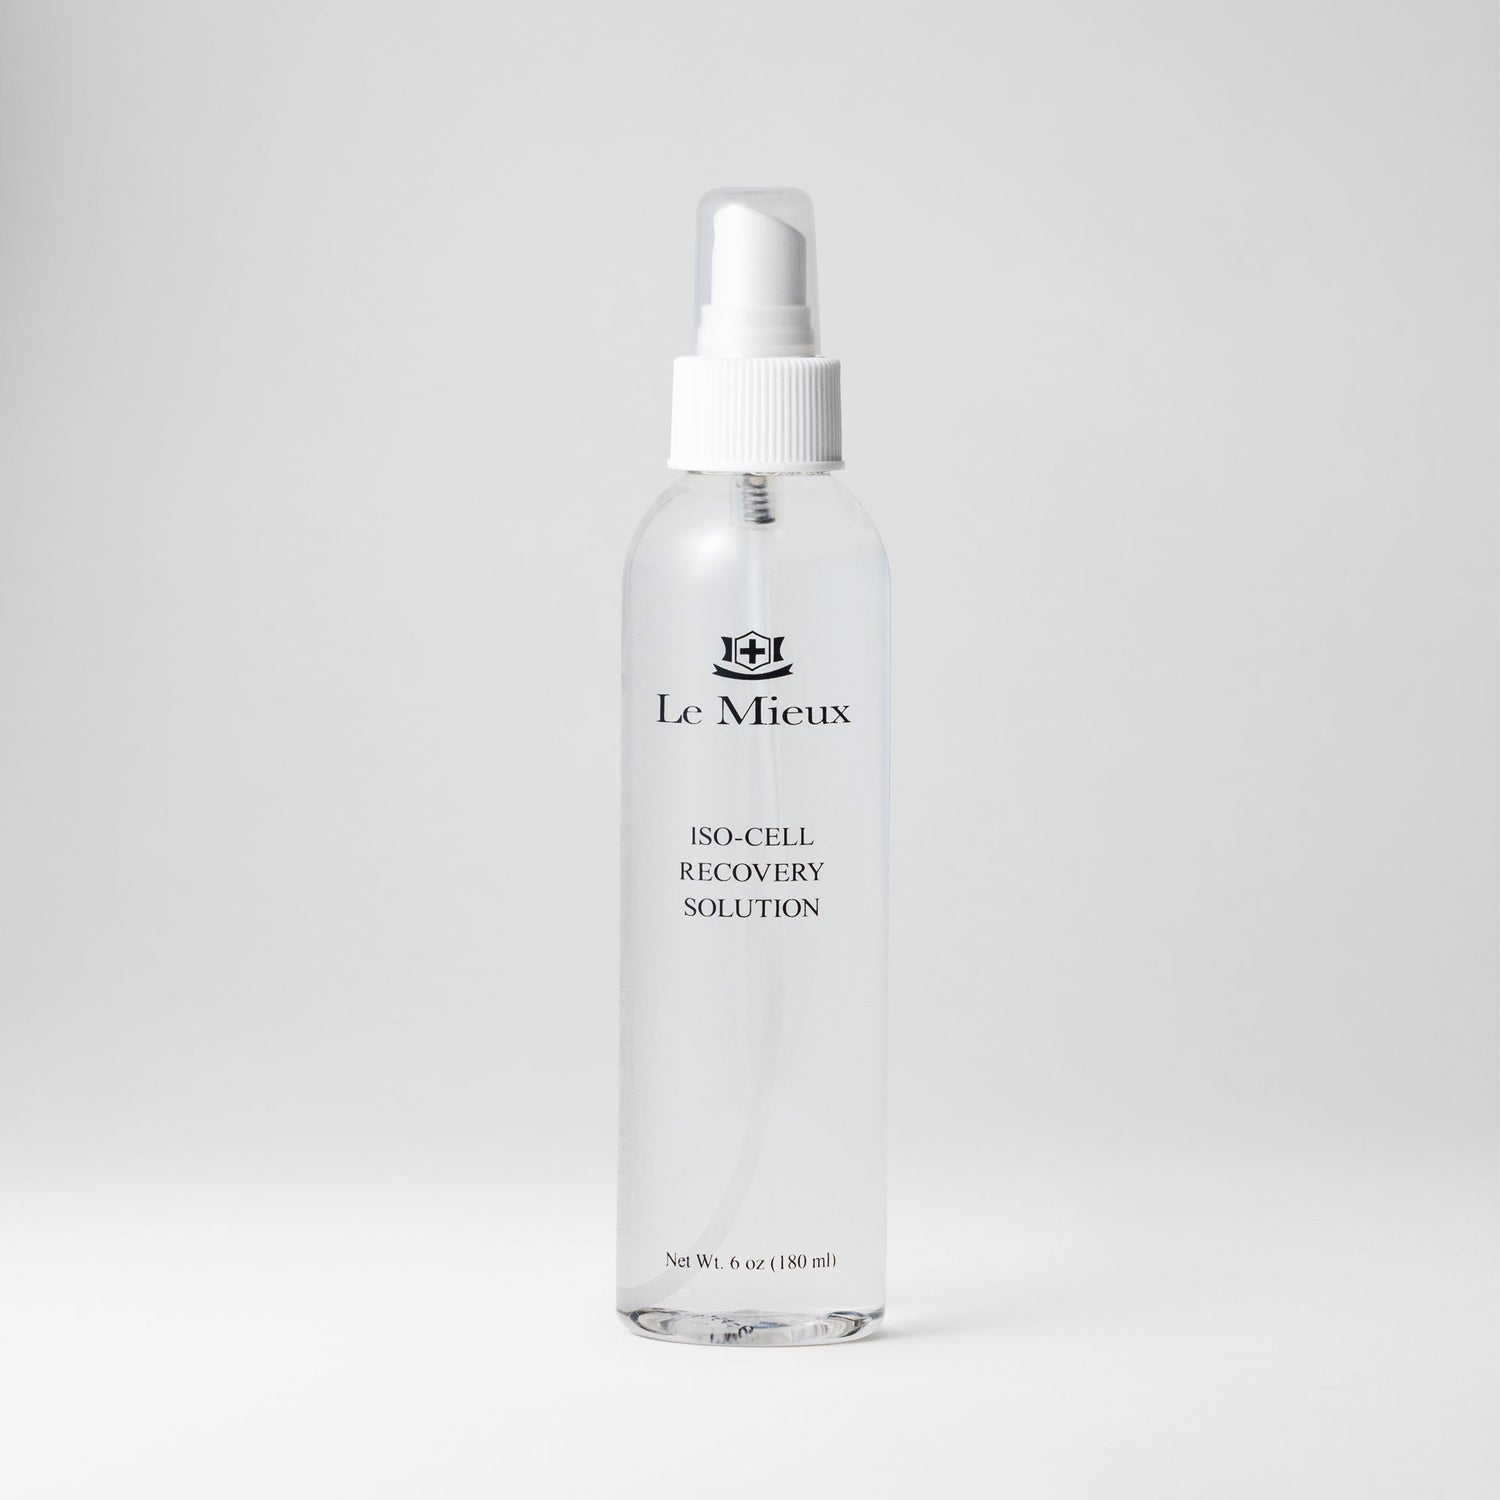  ISO-CELL RECOVERY SOLUTION from Le Mieux Skincare - featured